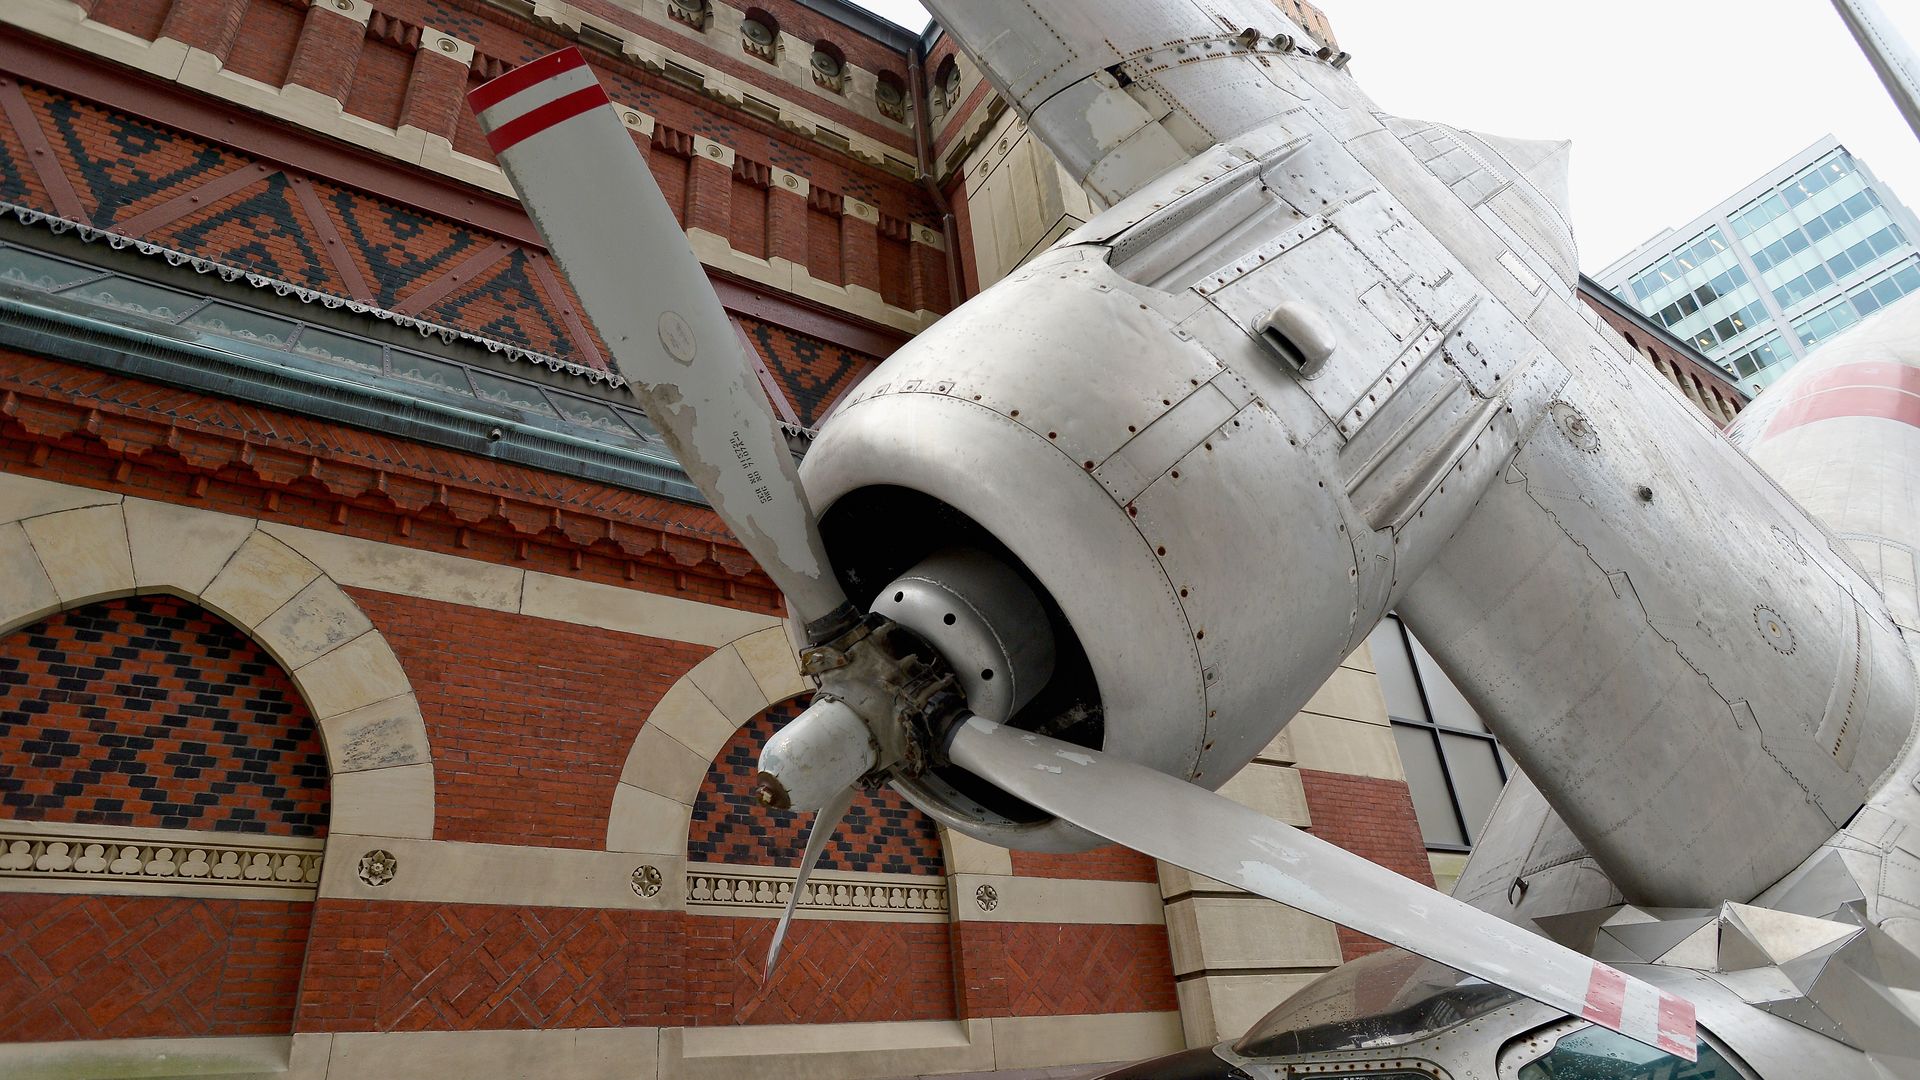 A photo of the scrap metal wing and propeller of "The Grumman Greenhouse."